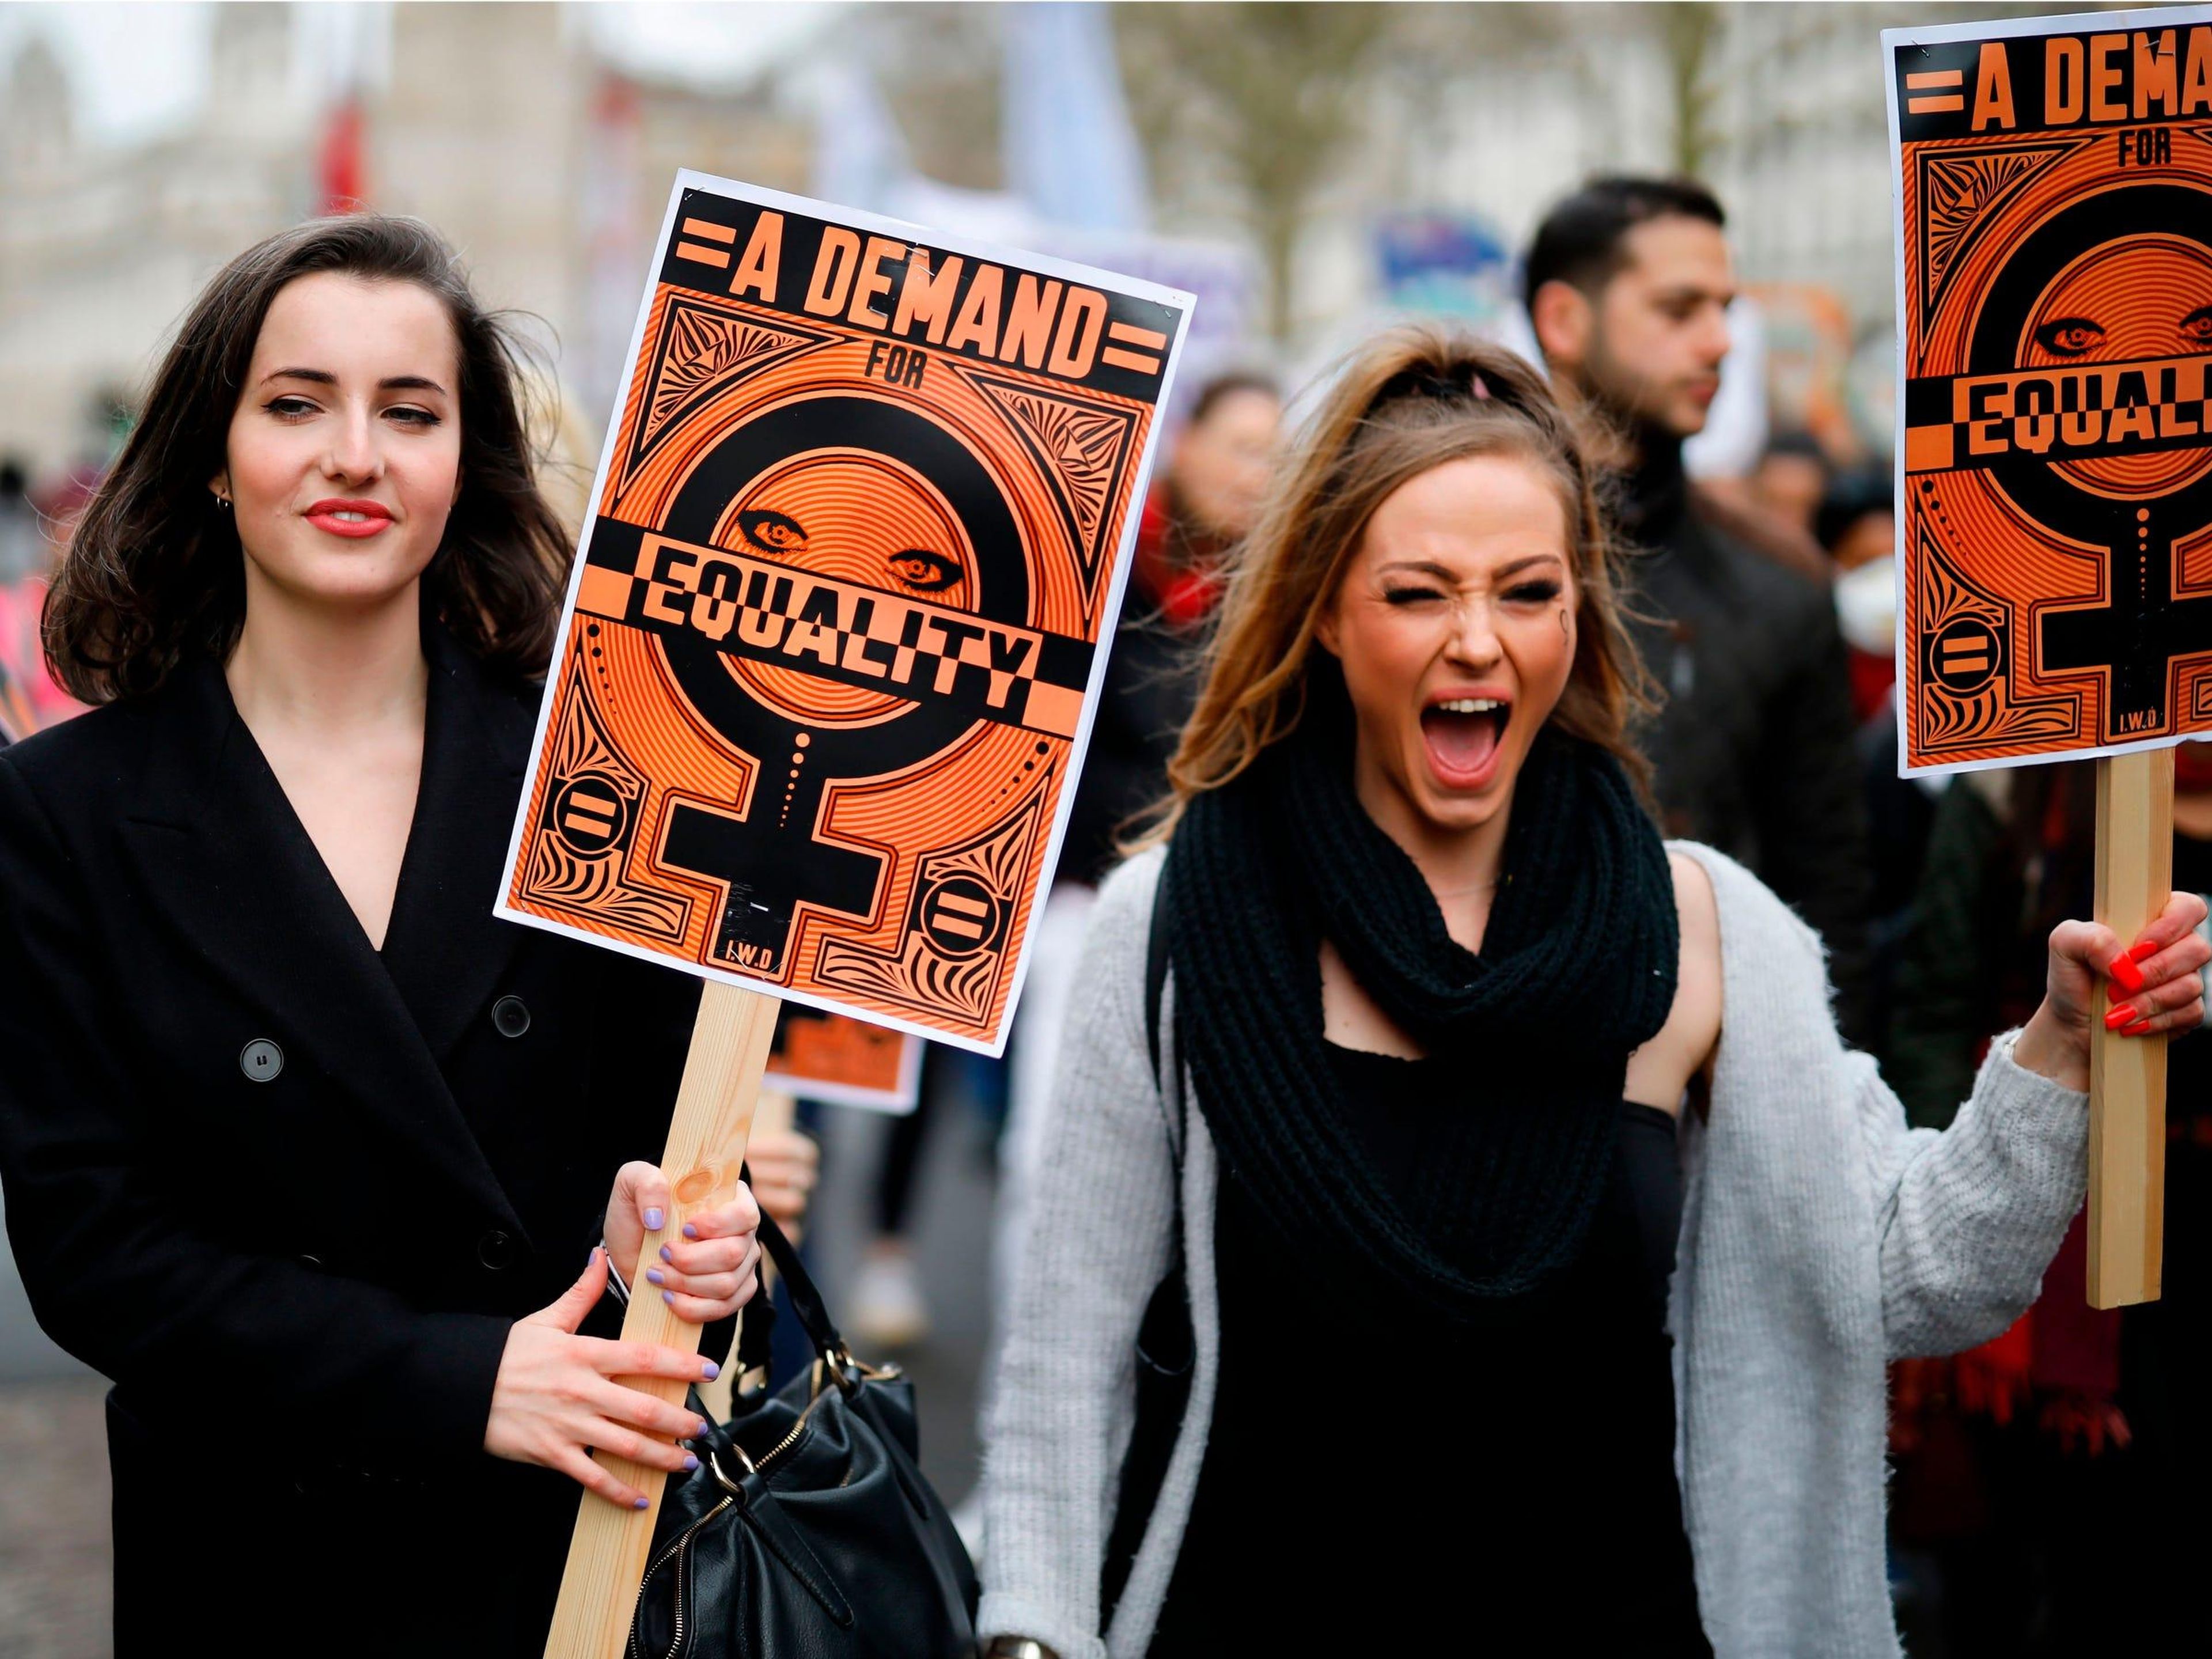 Marchers in London hold signs with messages of gender equality at a "March 4 Women" parade.